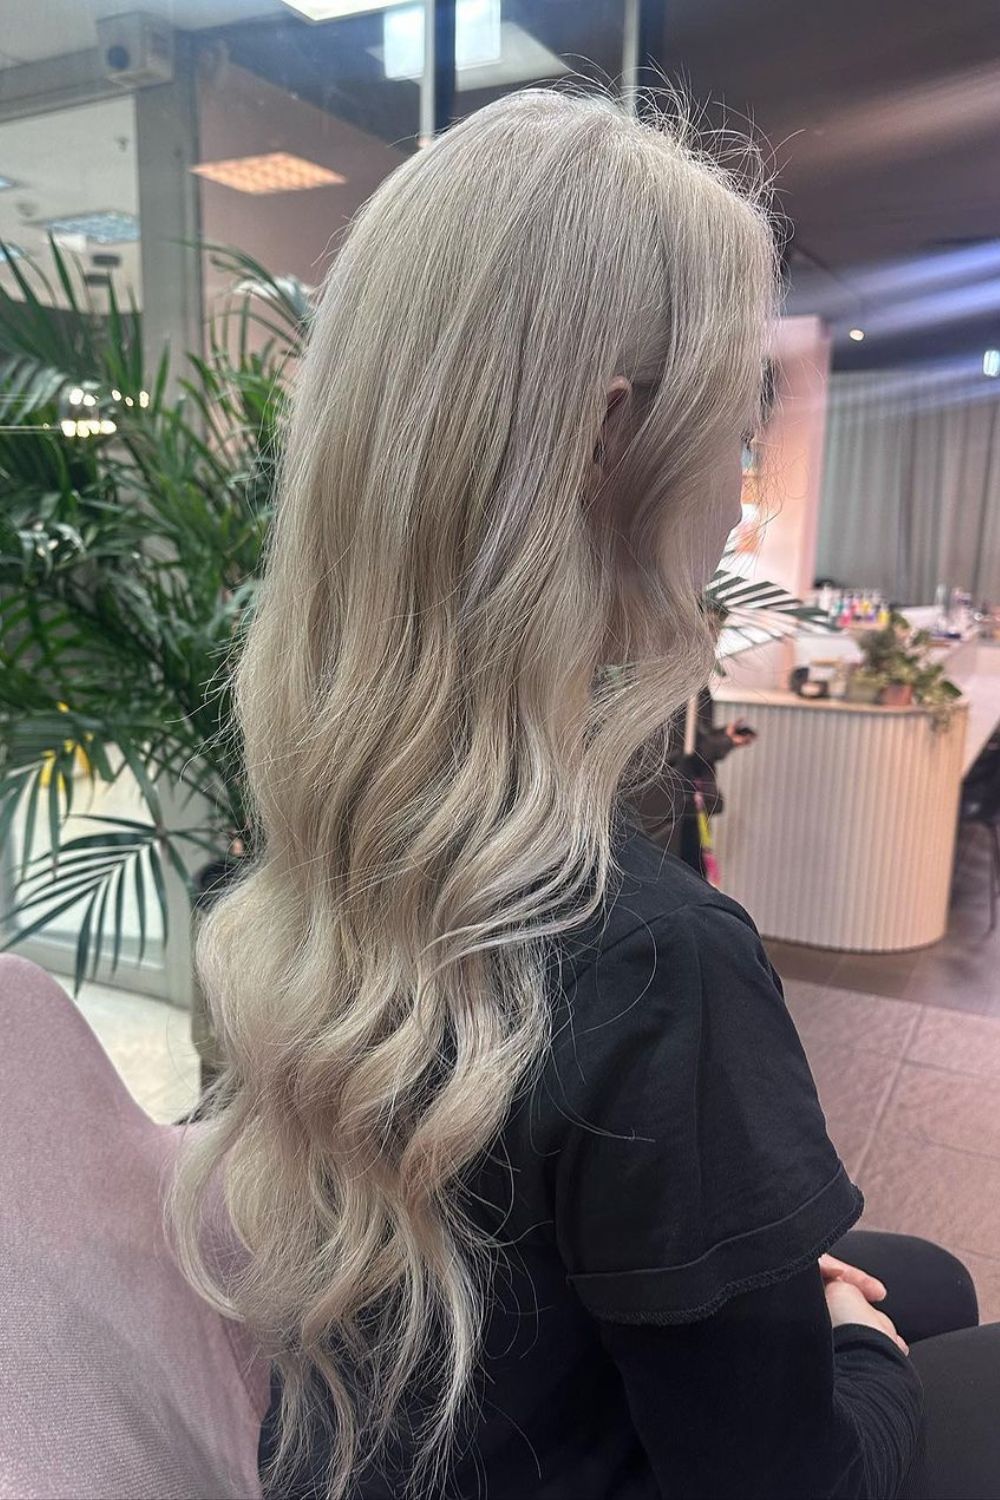 A woman with long curled cream blonde hair.